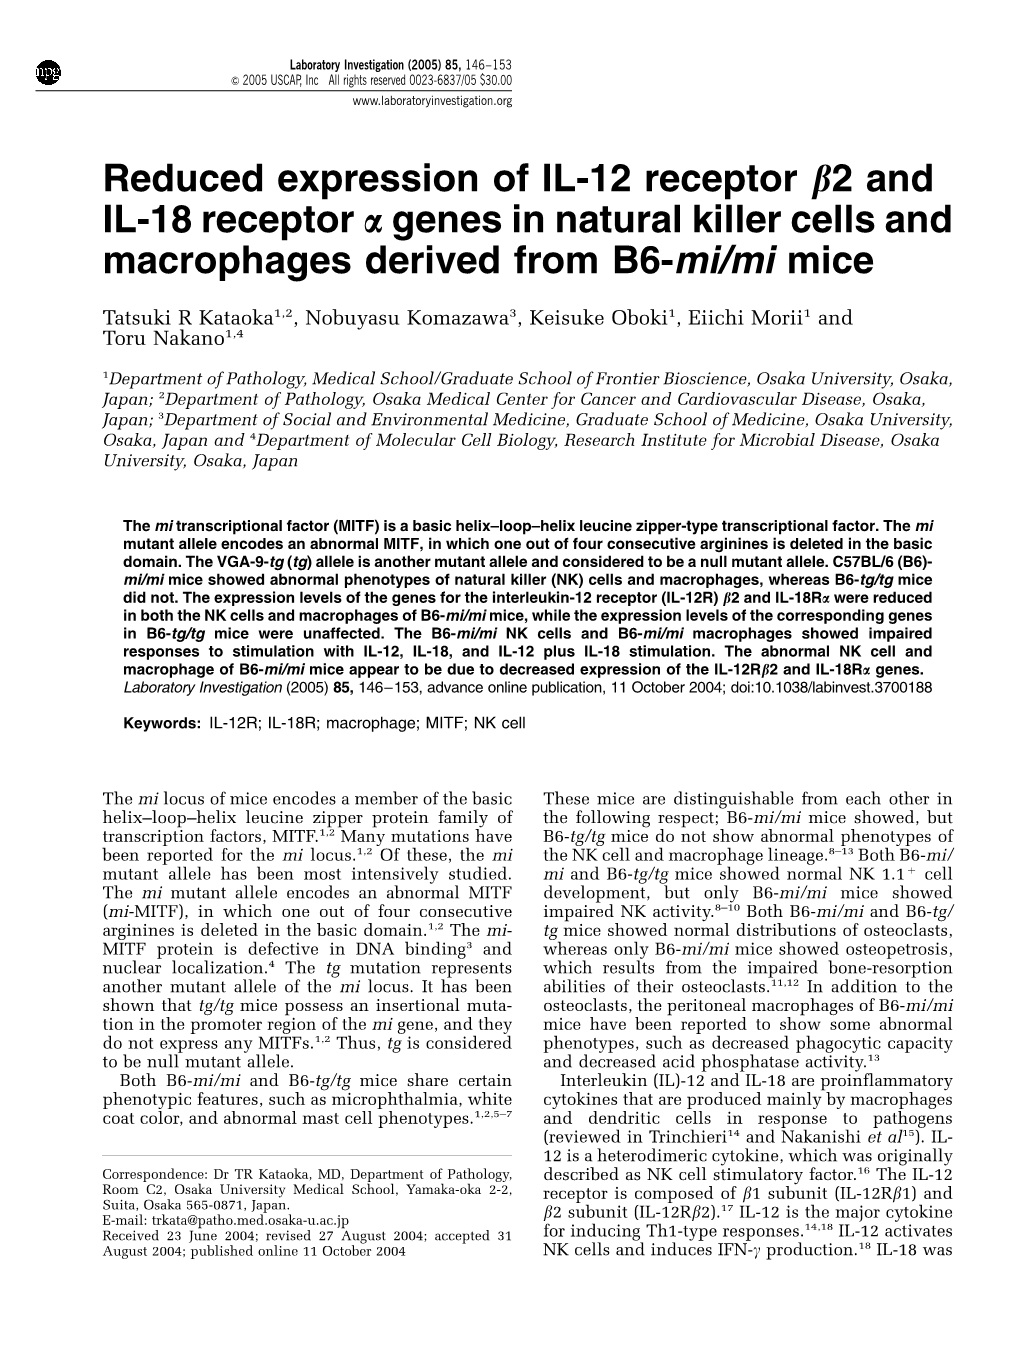 Reduced Expression of IL-12 Receptor B2 and IL-18 Receptor a Genes in Natural Killer Cells and Macrophages Derived from B6-Mi/Mi Mice